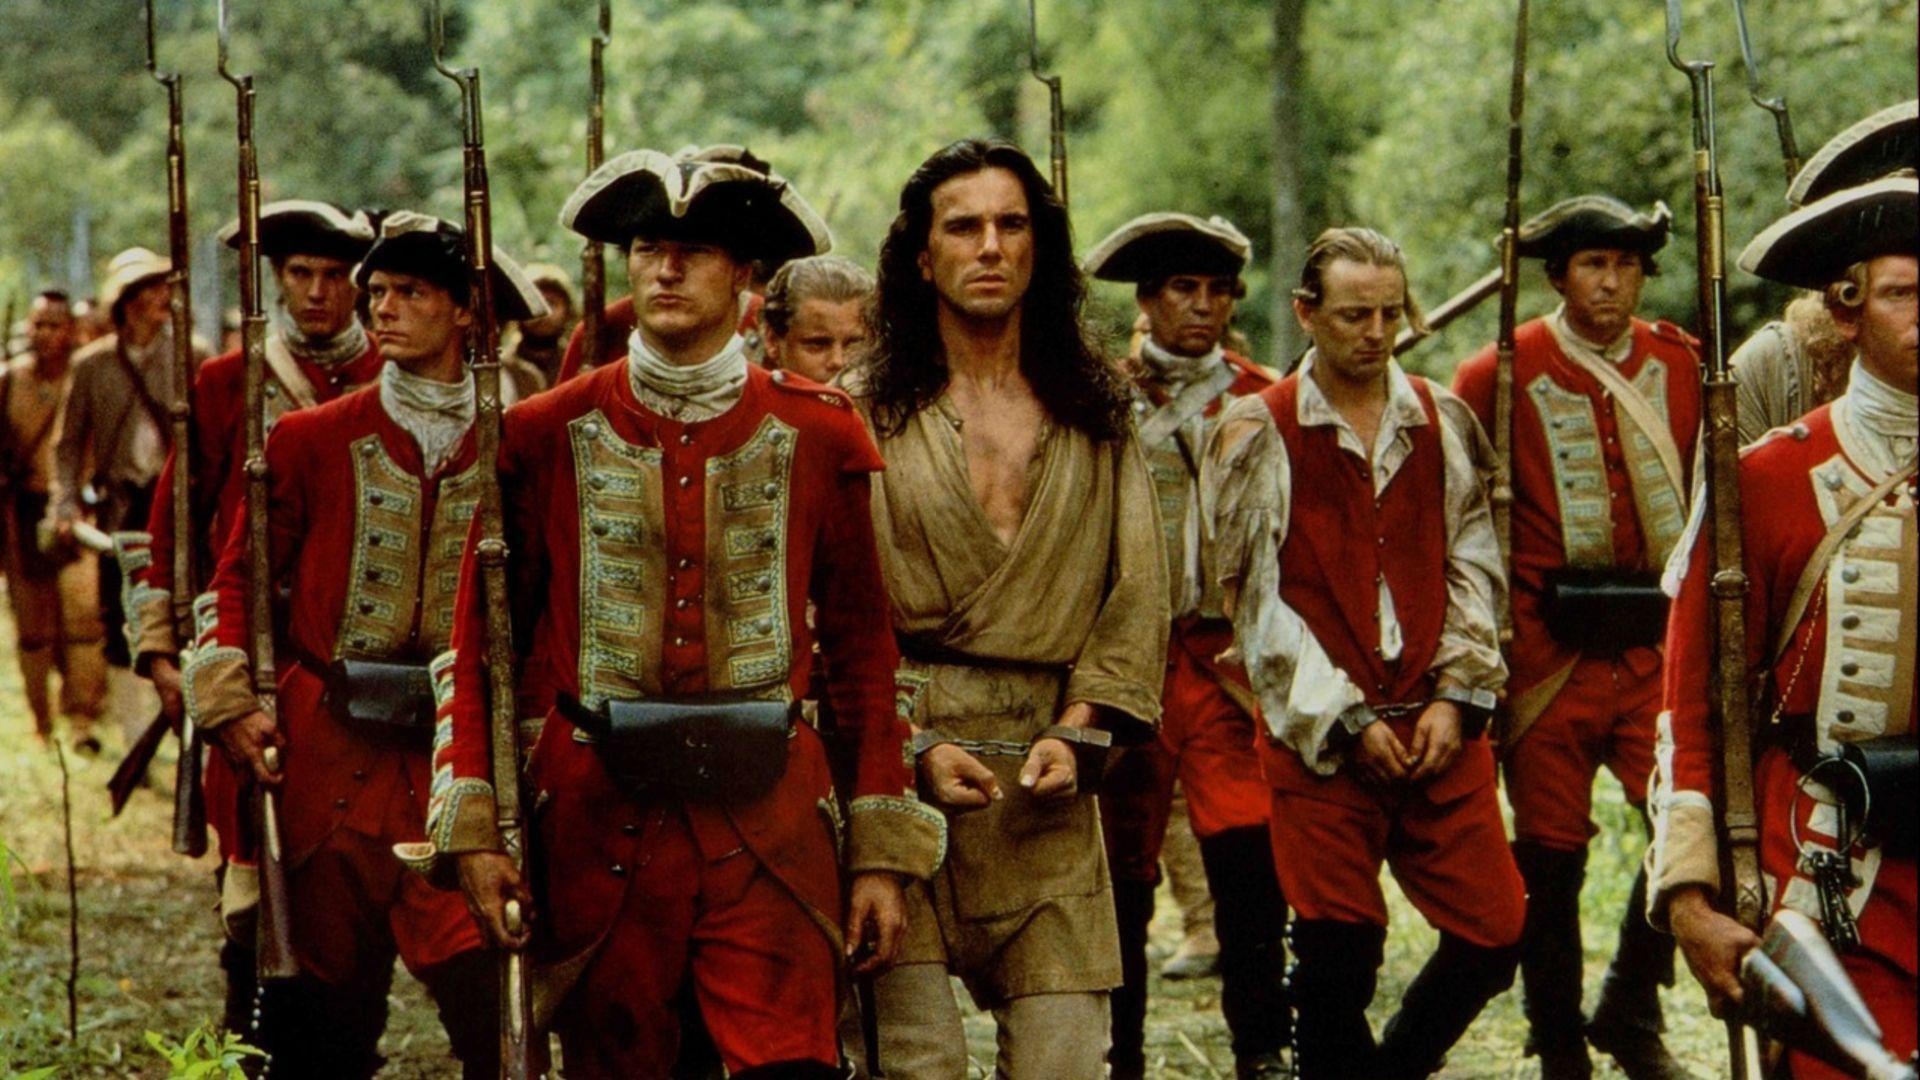 HD wallpaper, The Last Of The Mohicans, 1920X1080 Full Hd Desktop, Native American Culture, Historical Drama, Desktop Full Hd The Last Of The Mohicans Background, Epic Romance